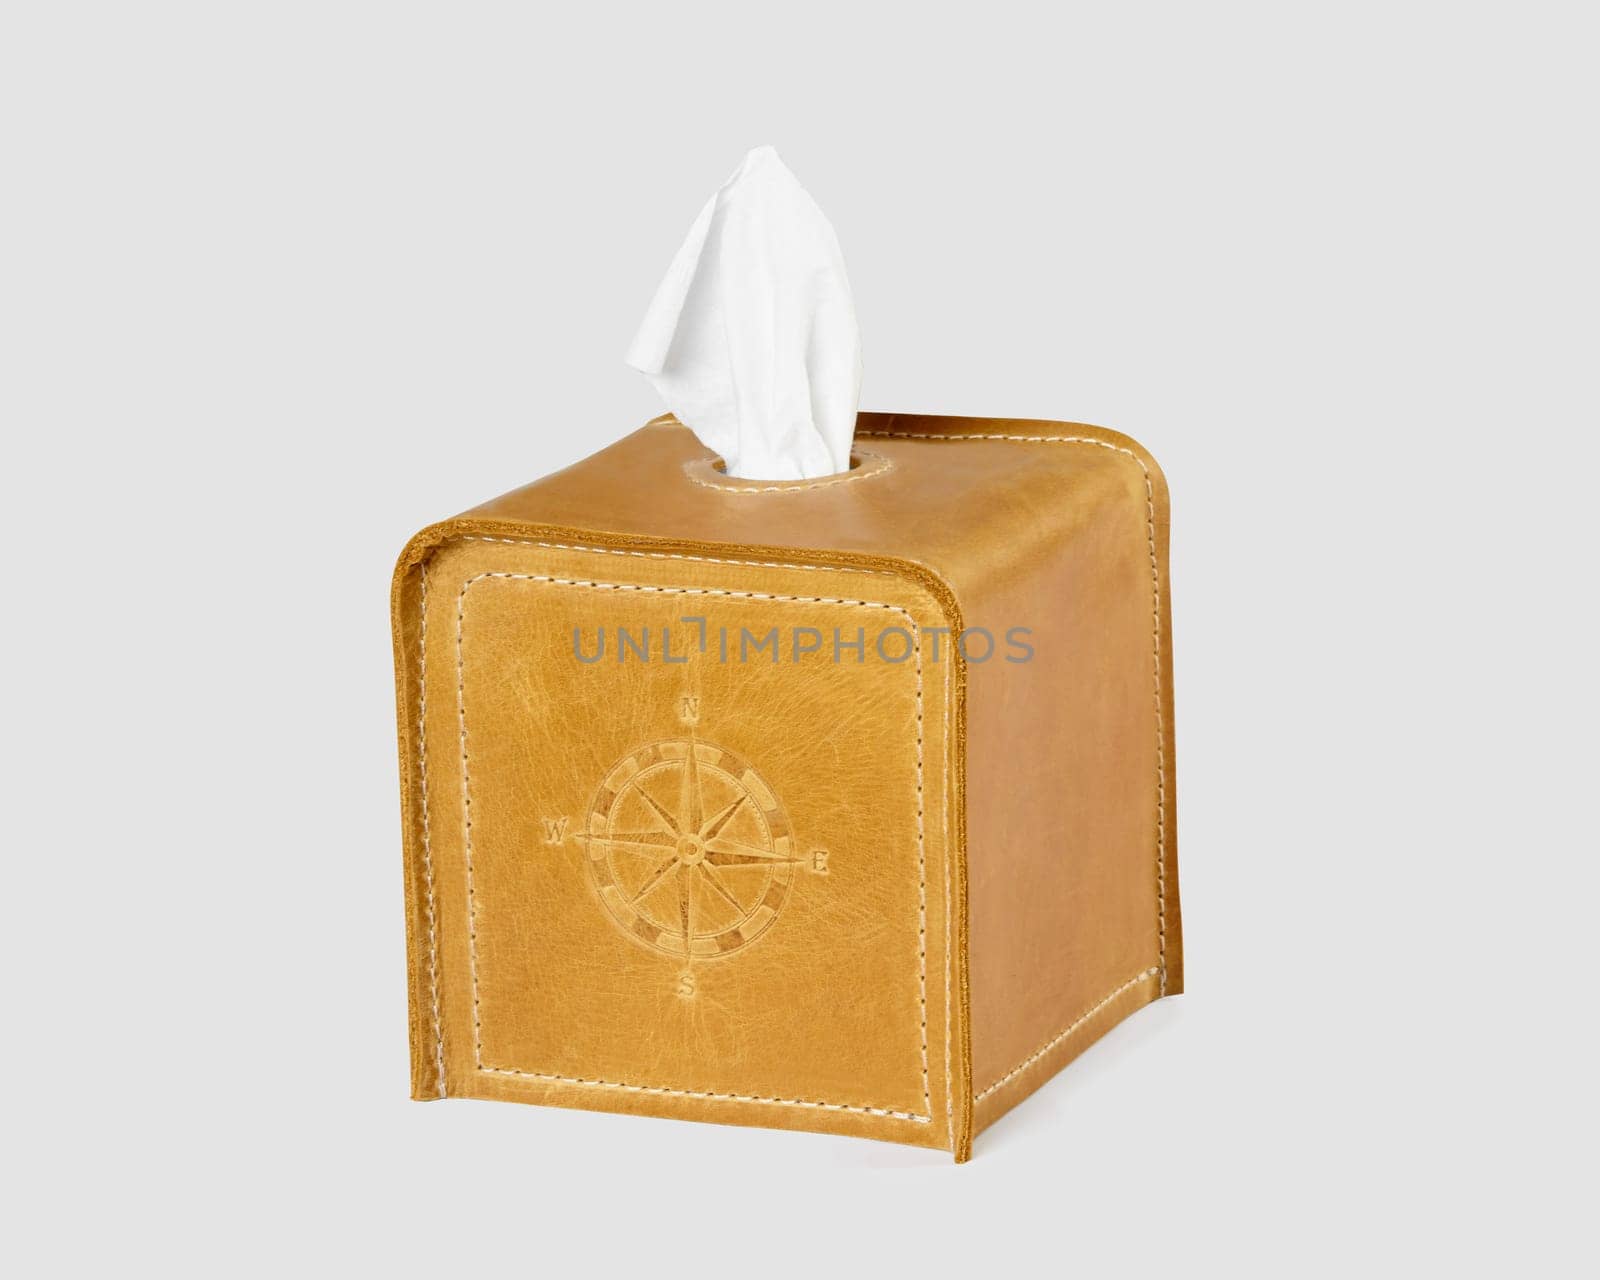 Stylish tan leather tissue box cover featuring compass embossing, isolated against white background. Stylish handcrafted home decor accessory